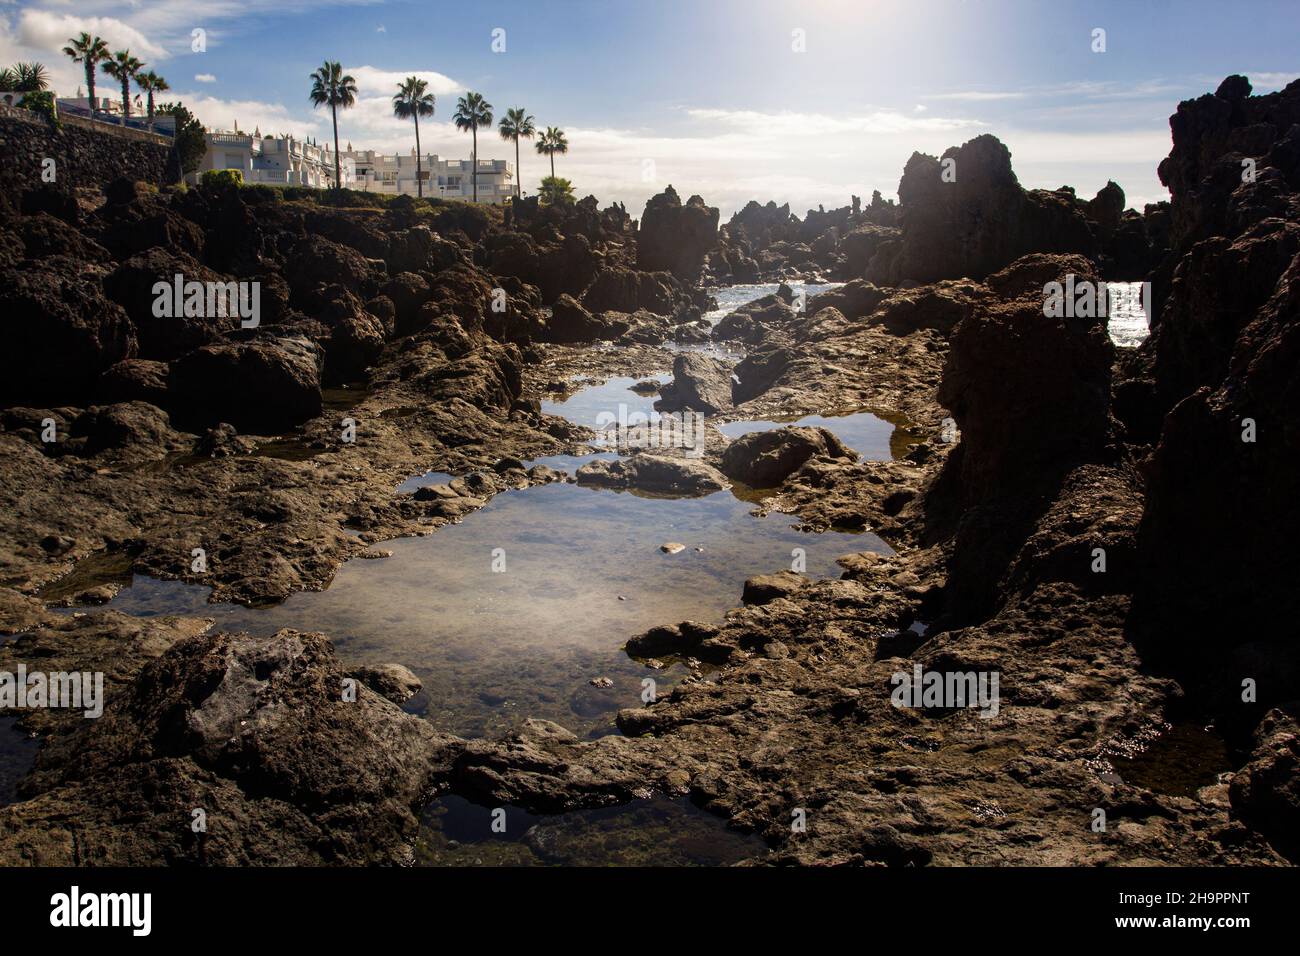 Charco El Diablo, Volcanic rocks formed from lava, Tenerife, Canary Islands, Spain. Stock Photo